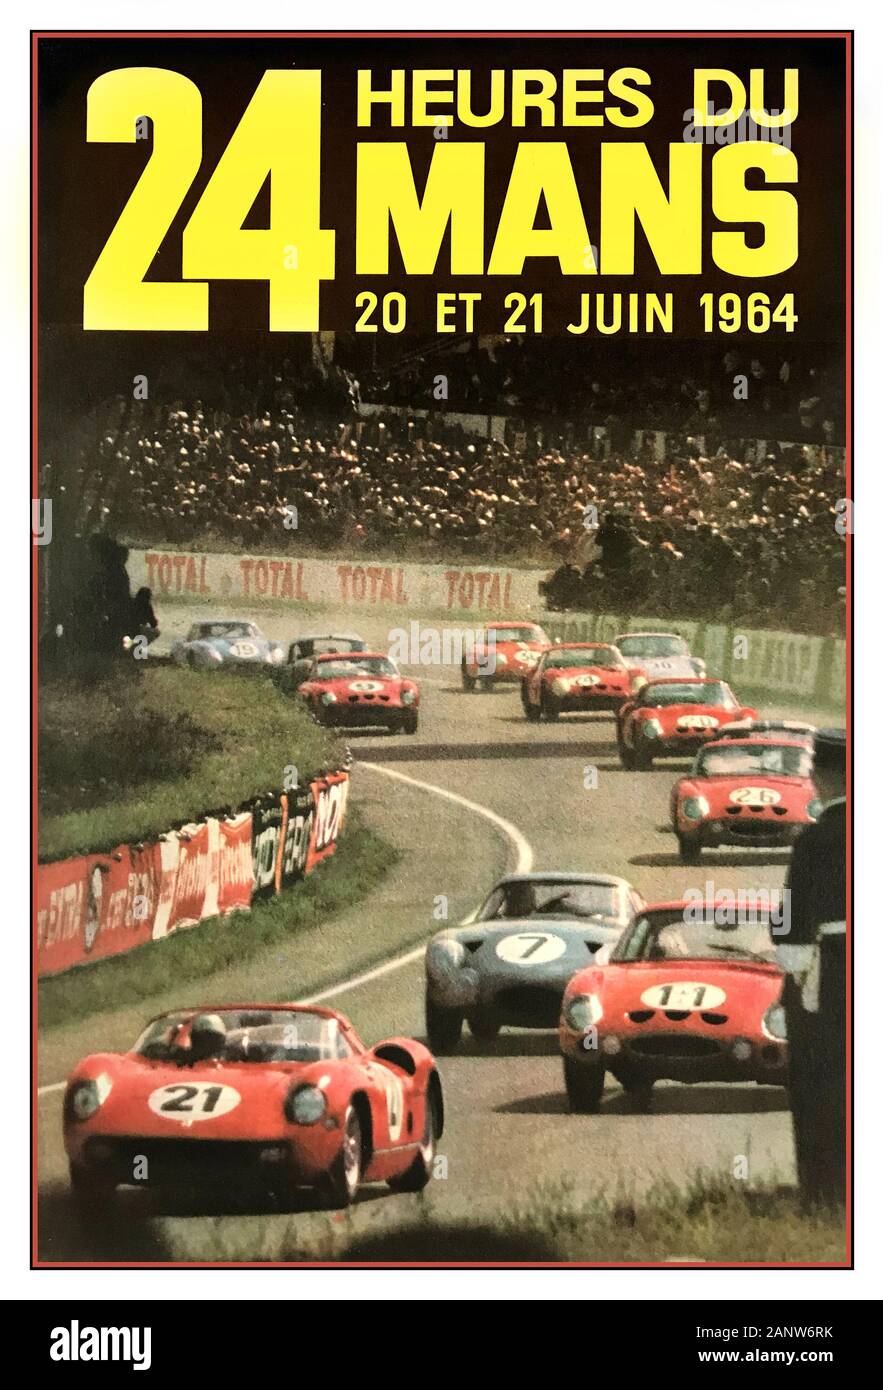 LE MANS 24 Heures 1964 vintage motor racing poster 24 Heures du Mans 20/21 Juin 1964 Le Mans France Ferrari was the winner for a record fifth year in a row – the 275 P of Nino Vaccarella and former Ferrari-privateer Jean Guichet covered a record distance for first place Stock Photo